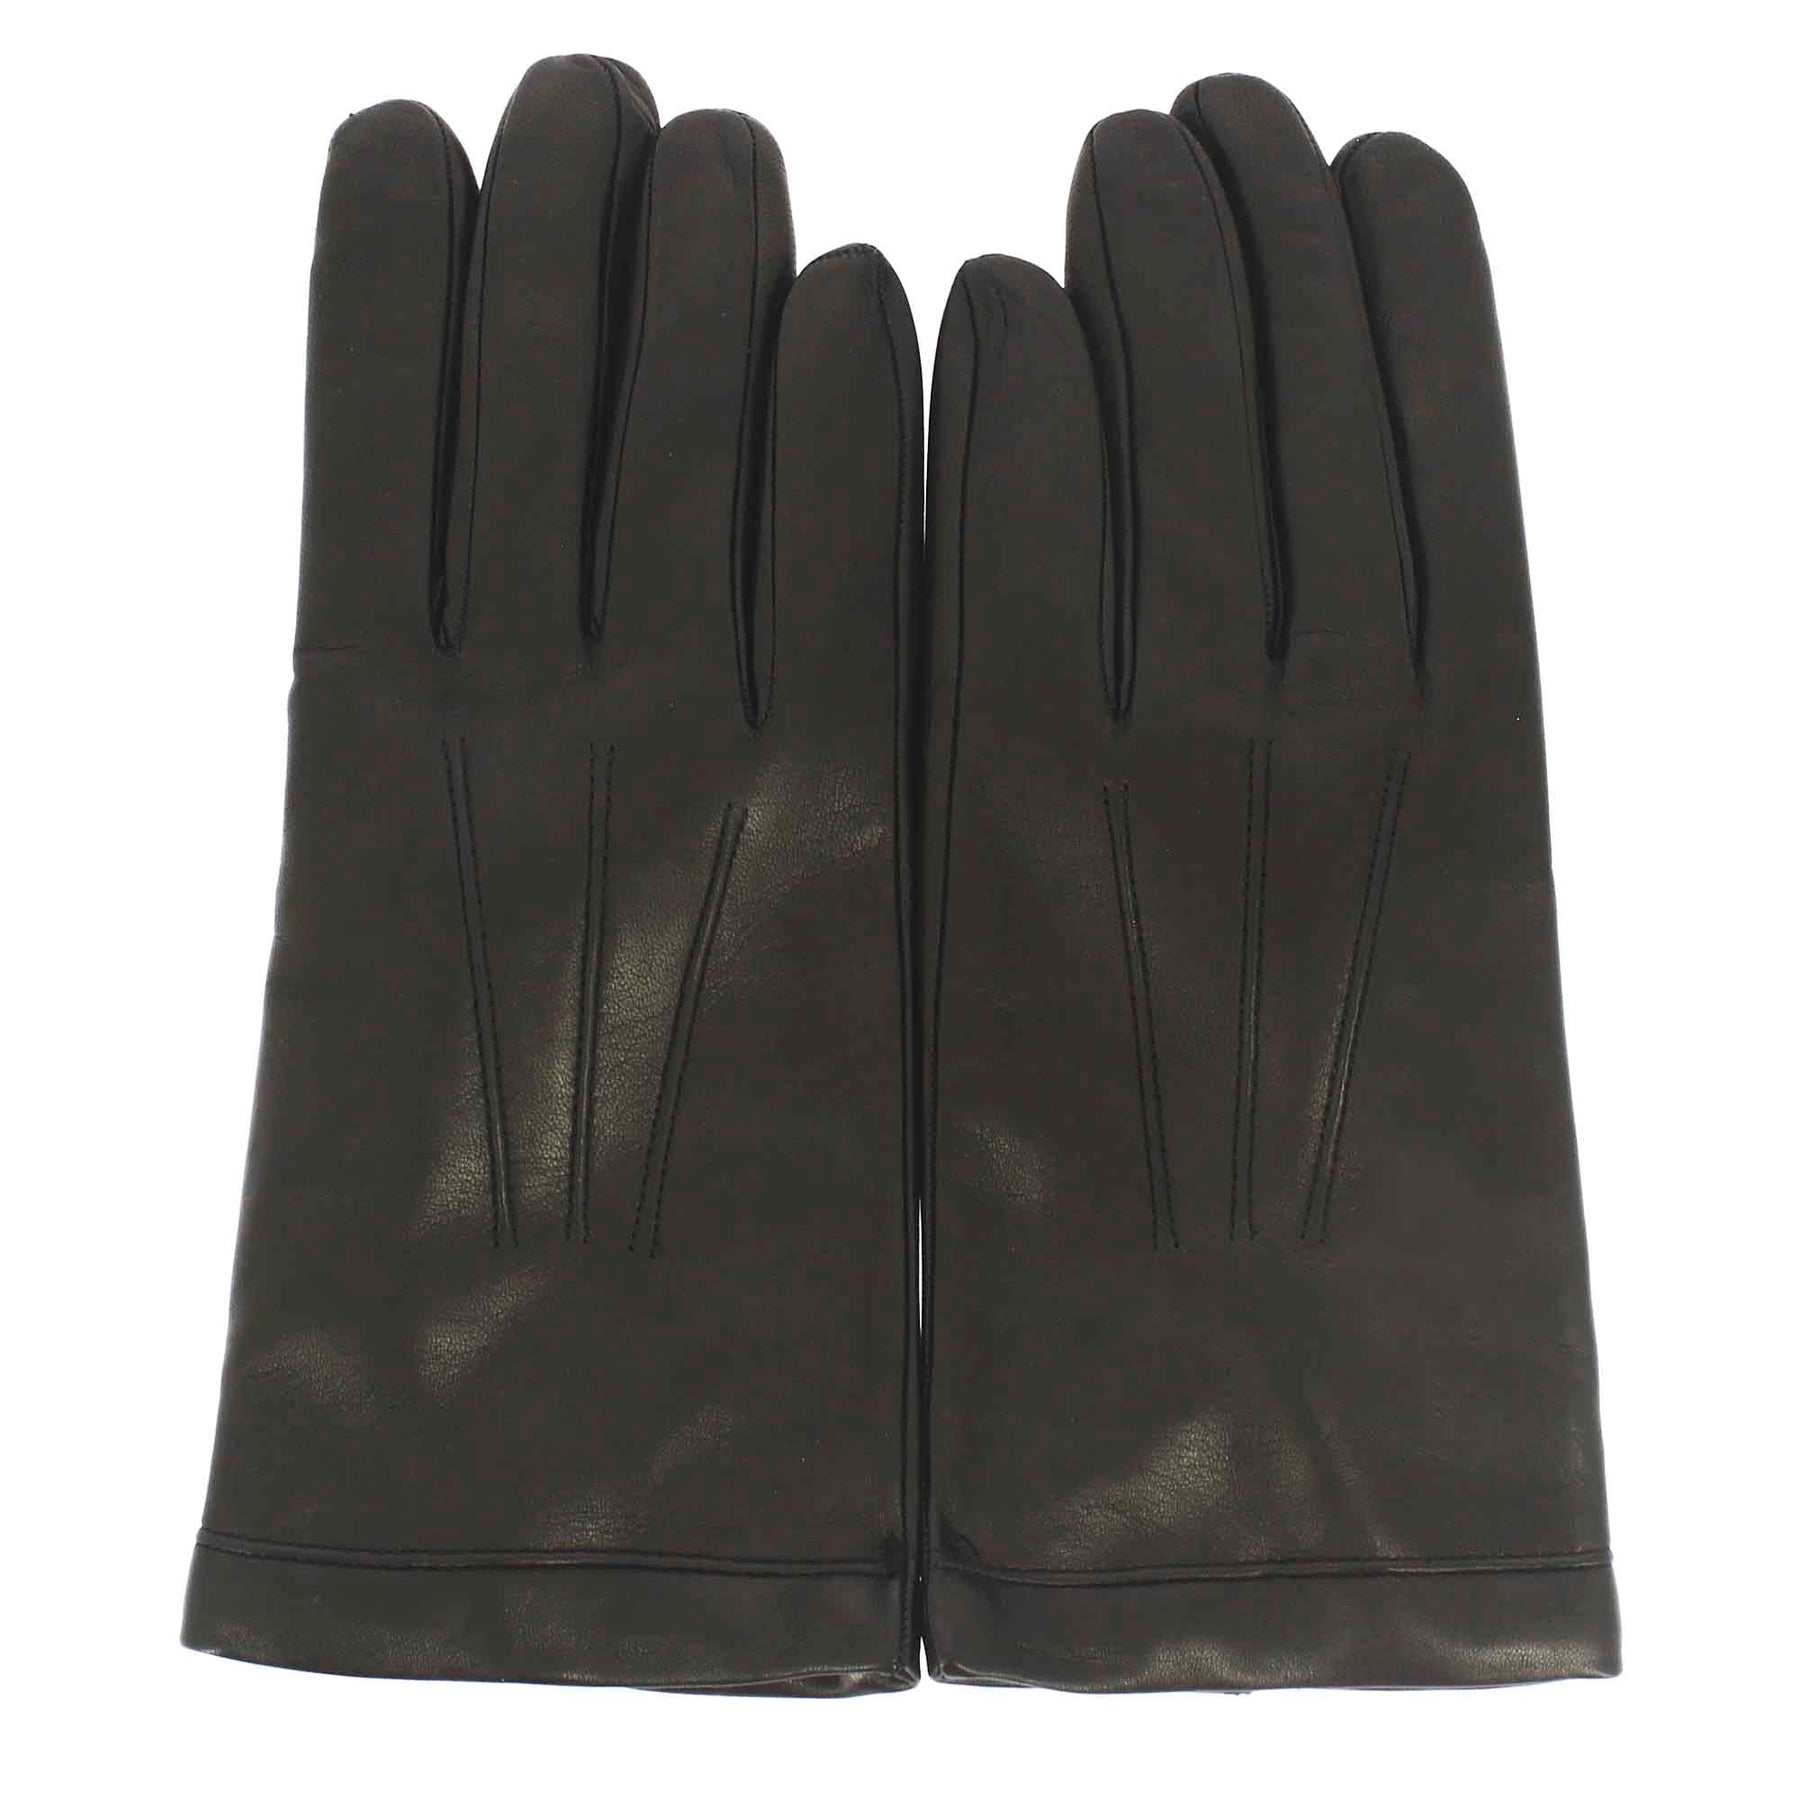 Black men's glove in black leather lined in cashmere